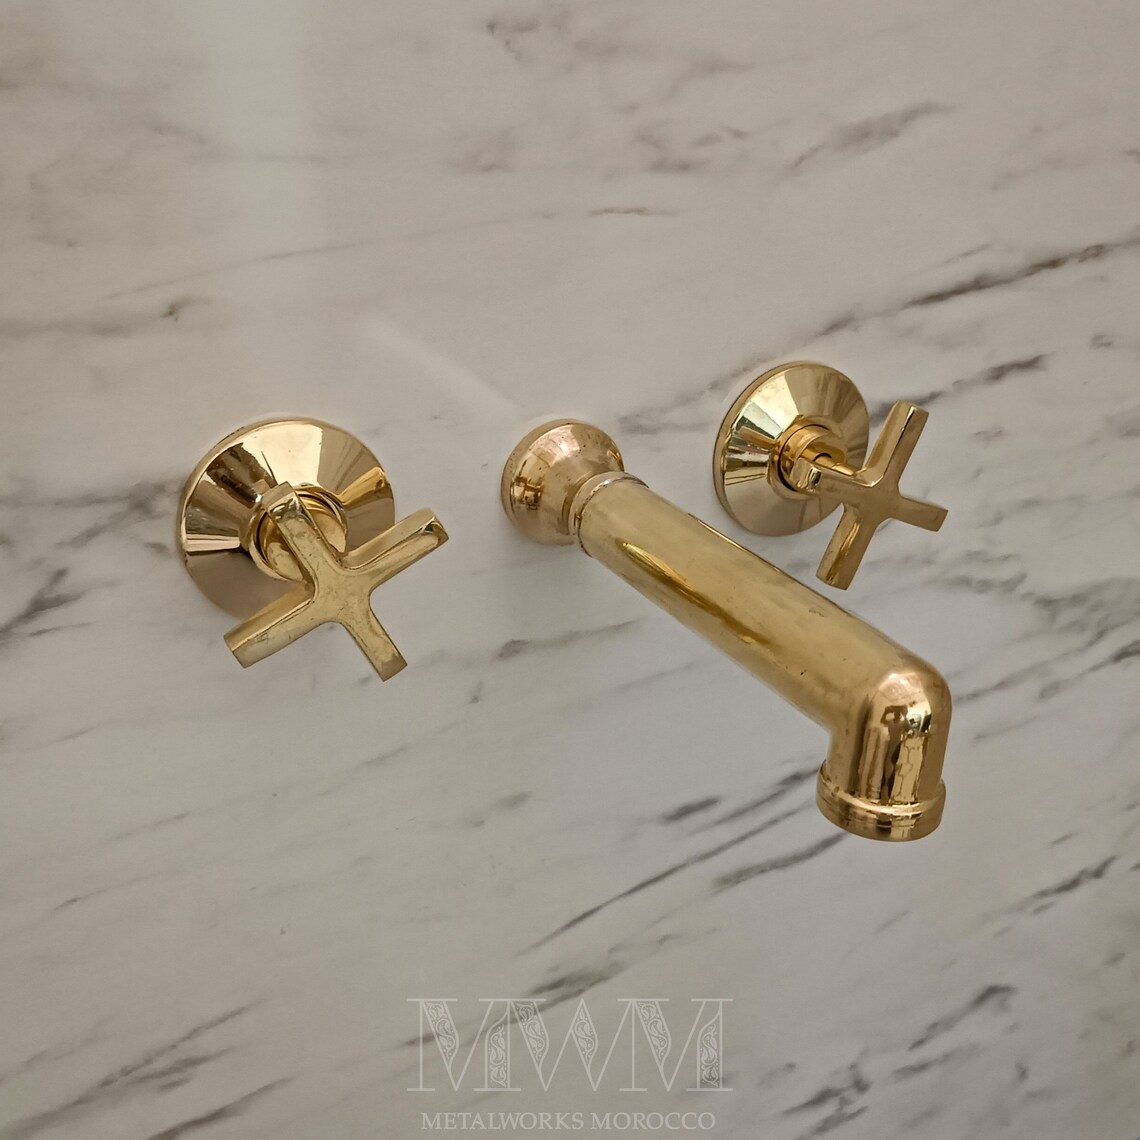 Raw Brass Wall Mount Tub Filler With Big Spout